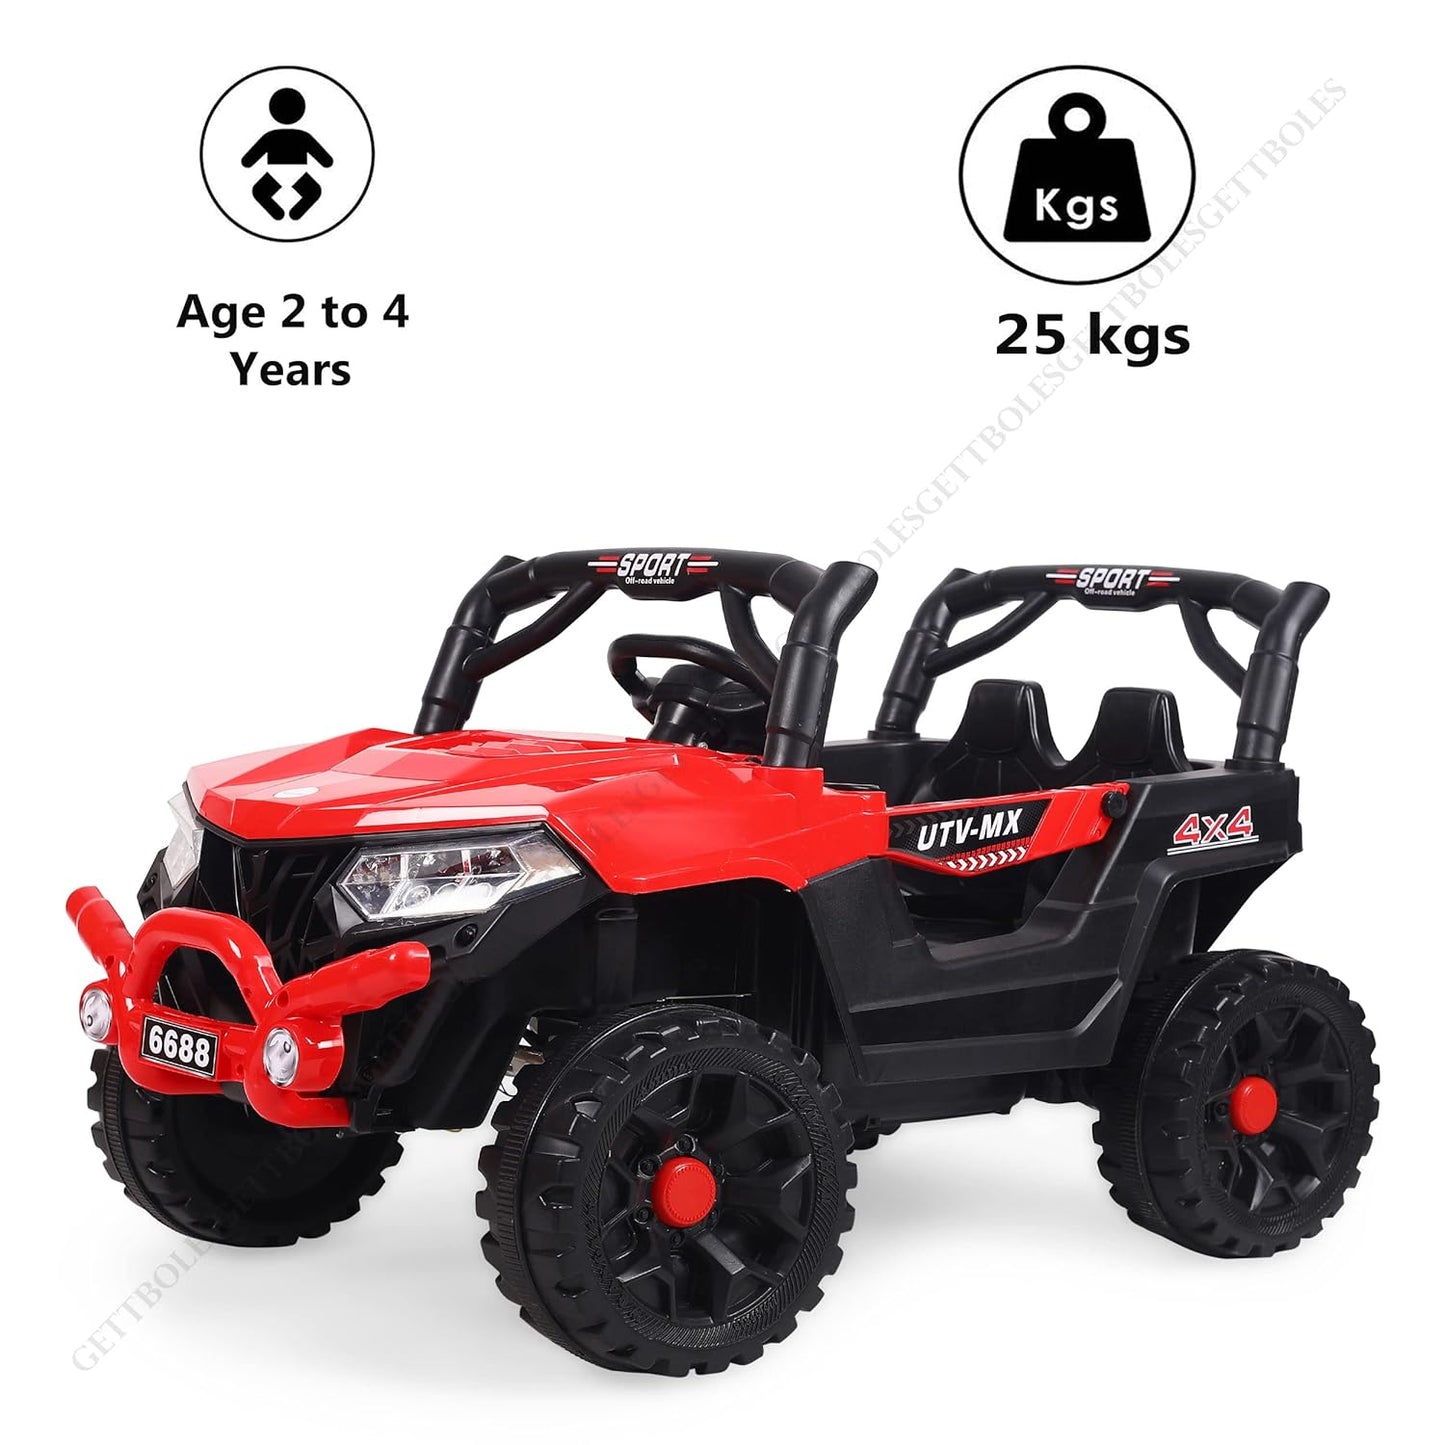 GettBoles 907 4X4 Electric Rechargeable Ride on Jeep for Kids of Age 2 to 4 Years- The Battery Operated Kids Jeep with Music, Led Lights and Bluetooth Remote (Red)